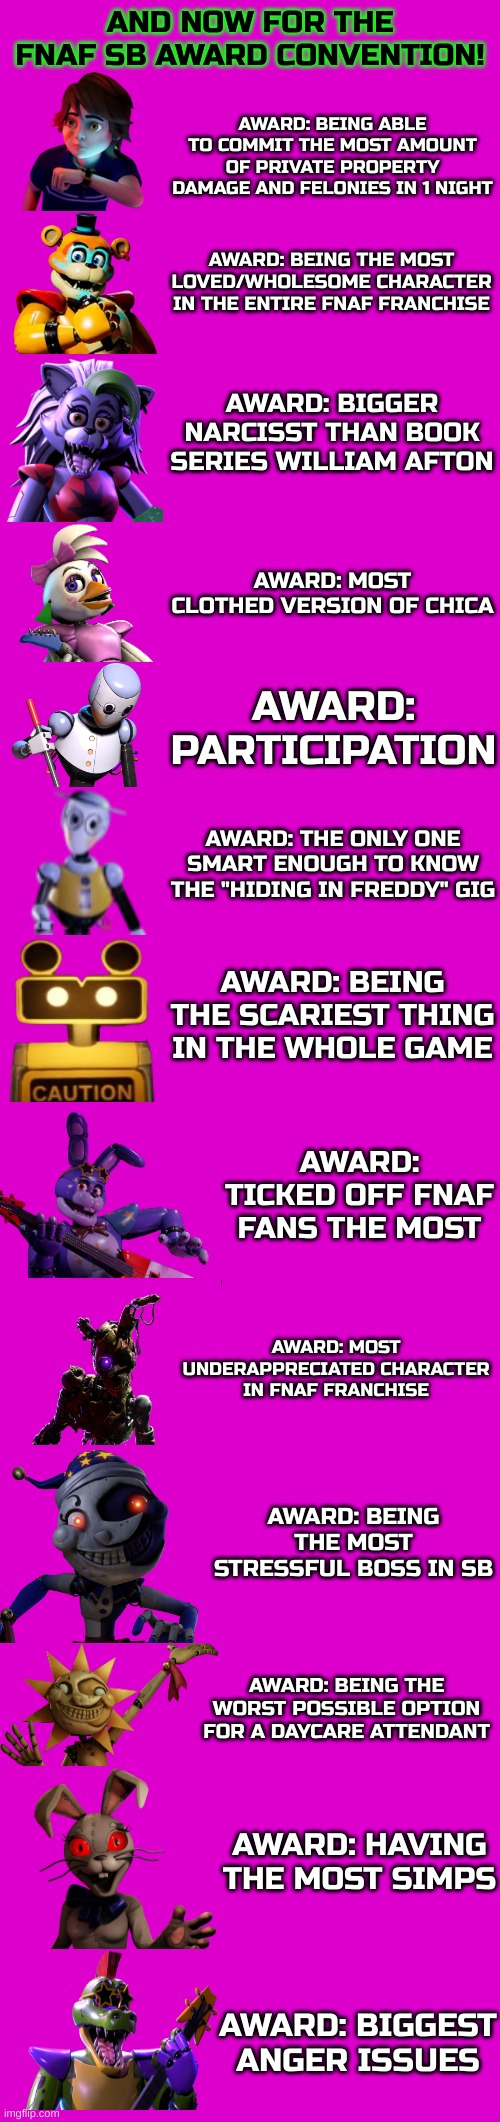 These are true | AND NOW FOR THE FNAF SB AWARD CONVENTION! AWARD: BEING ABLE TO COMMIT THE MOST AMOUNT OF PRIVATE PROPERTY DAMAGE AND FELONIES IN 1 NIGHT; AWARD: BEING THE MOST LOVED/WHOLESOME CHARACTER IN THE ENTIRE FNAF FRANCHISE; AWARD: BIGGER NARCISST THAN BOOK SERIES WILLIAM AFTON; AWARD: MOST CLOTHED VERSION OF CHICA; AWARD: PARTICIPATION; AWARD: THE ONLY ONE SMART ENOUGH TO KNOW THE "HIDING IN FREDDY" GIG; AWARD: BEING THE SCARIEST THING IN THE WHOLE GAME; AWARD: TICKED OFF FNAF FANS THE MOST; AWARD: MOST UNDERAPPRECIATED CHARACTER IN FNAF FRANCHISE; AWARD: BEING THE MOST STRESSFUL BOSS IN SB; AWARD: BEING THE WORST POSSIBLE OPTION FOR A DAYCARE ATTENDANT; AWARD: HAVING THE MOST SIMPS; AWARD: BIGGEST ANGER ISSUES | image tagged in fnaf,fnaf security breach,awards | made w/ Imgflip meme maker